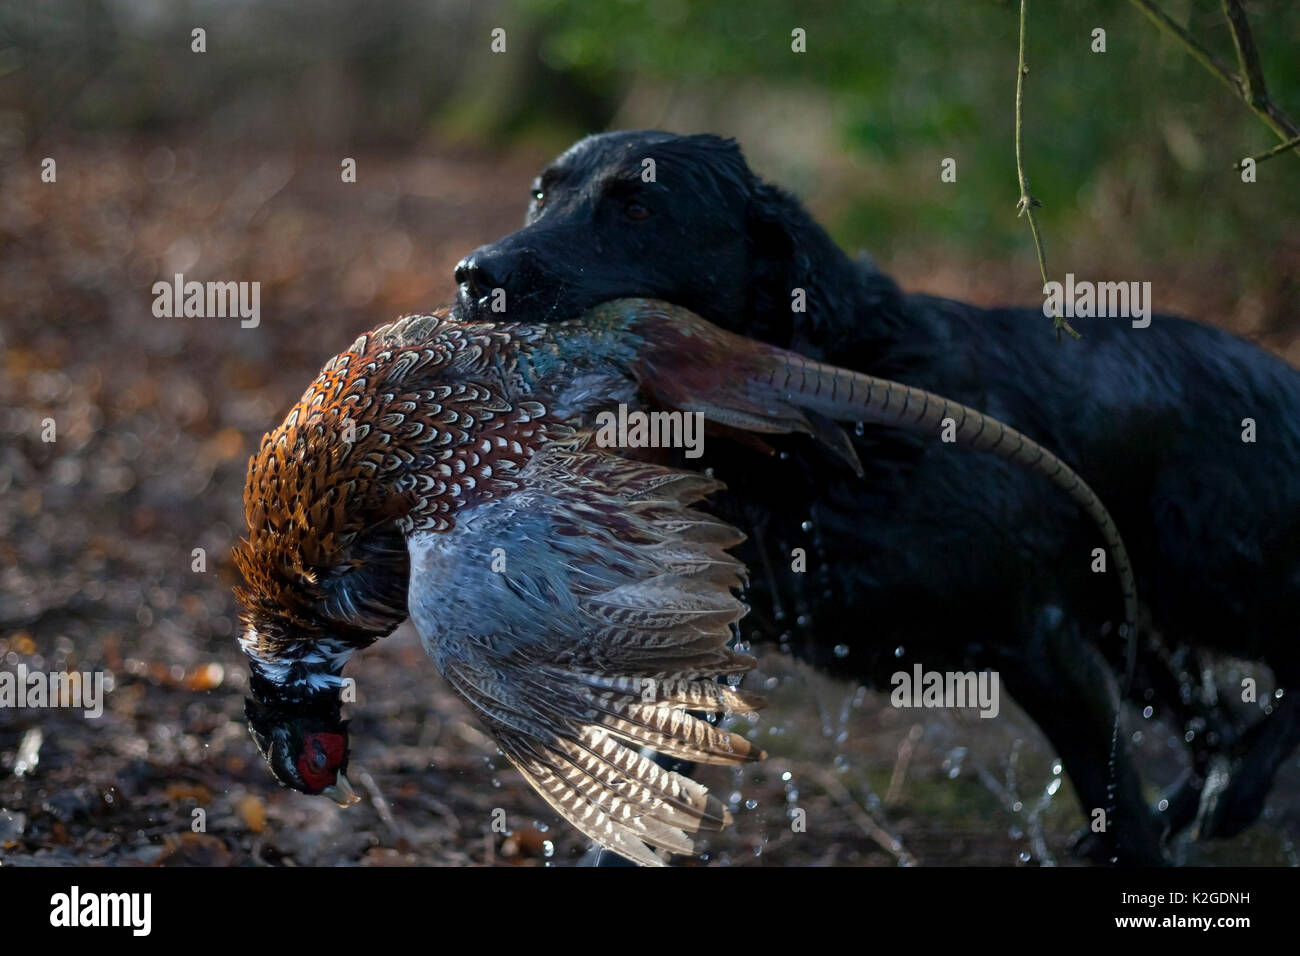 Wet labrador gundog emerging from lake with a male Ring-necked pheasant (Phasianus colchicus) in its mouth during a winter shoot on shooting estate, southern England, UK. January. Stock Photo